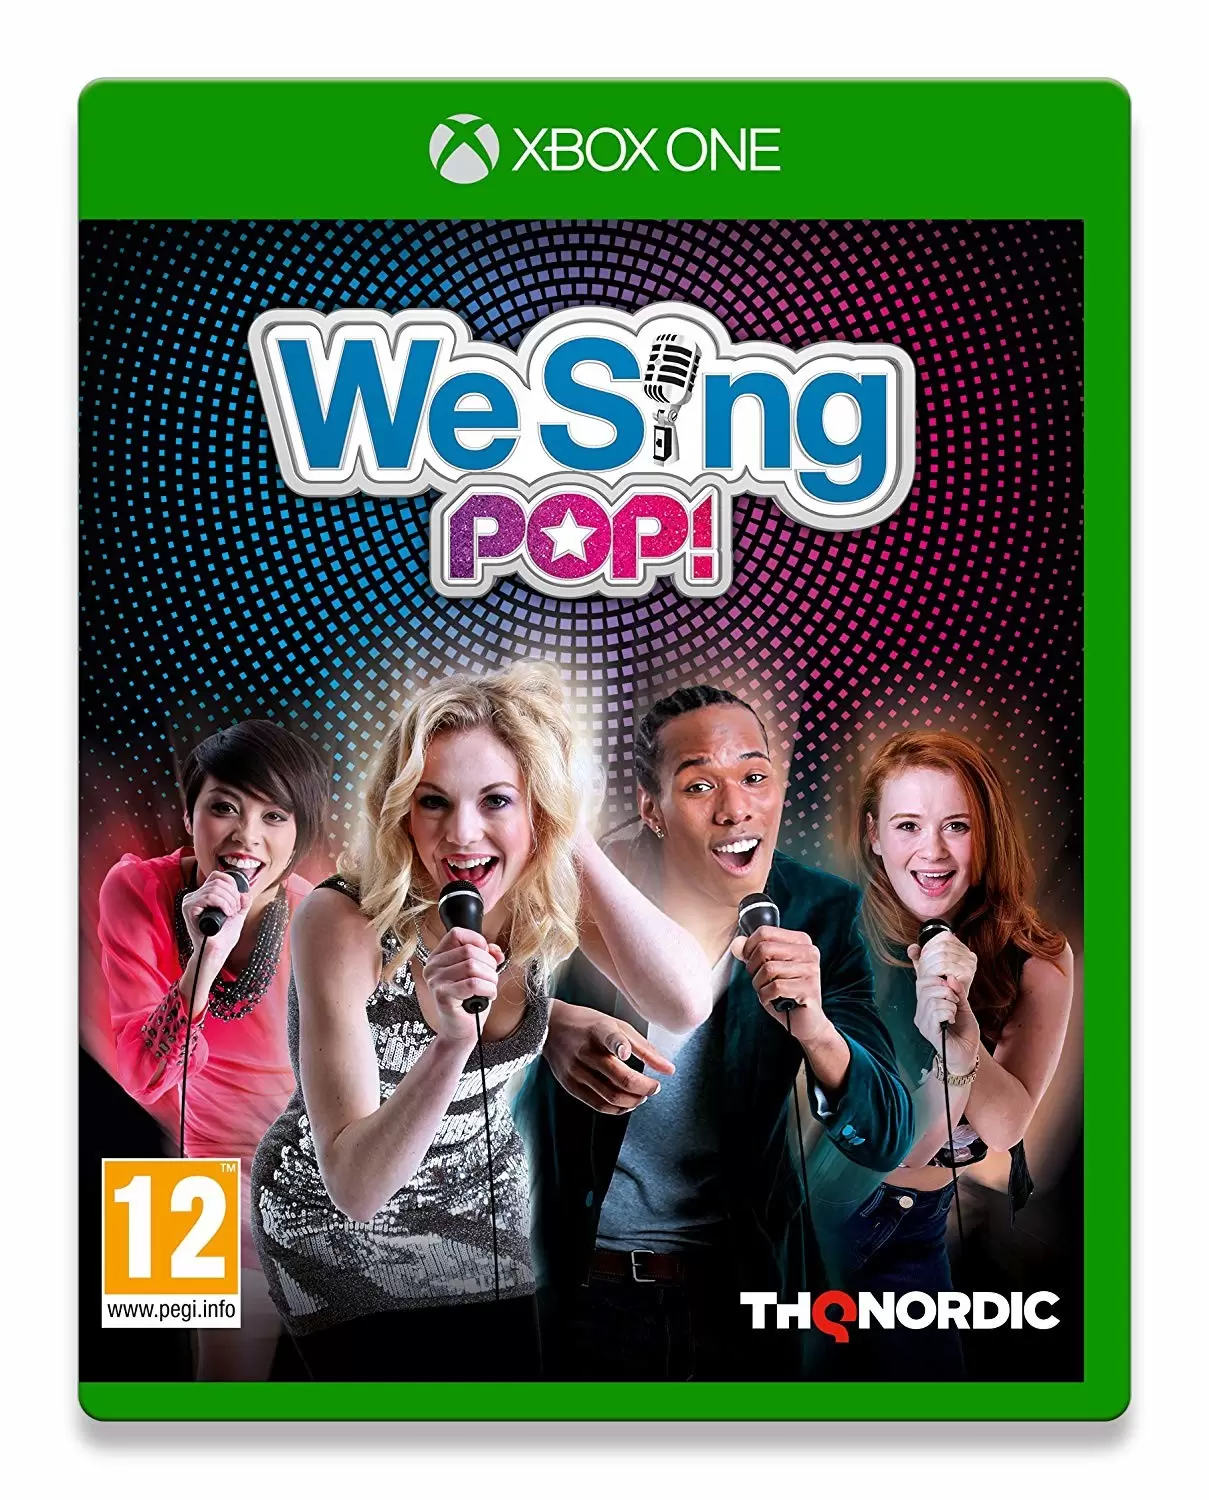 XBOX One Games - We Sing Pop